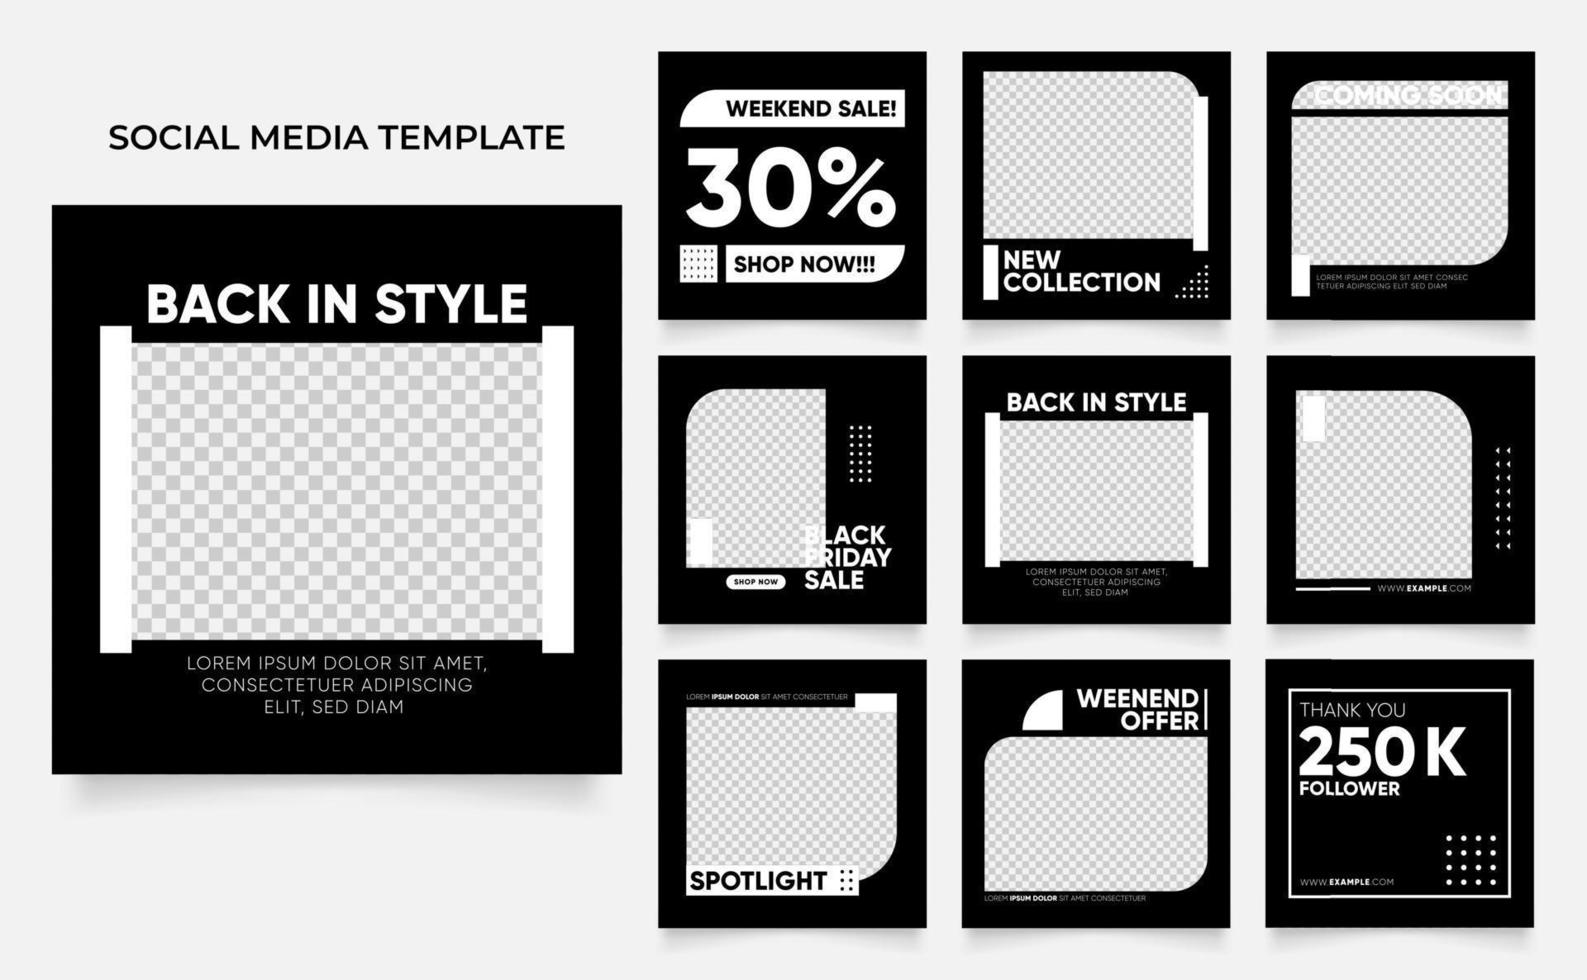 Fully editable social media post template banner fashion sale in black and white color vector